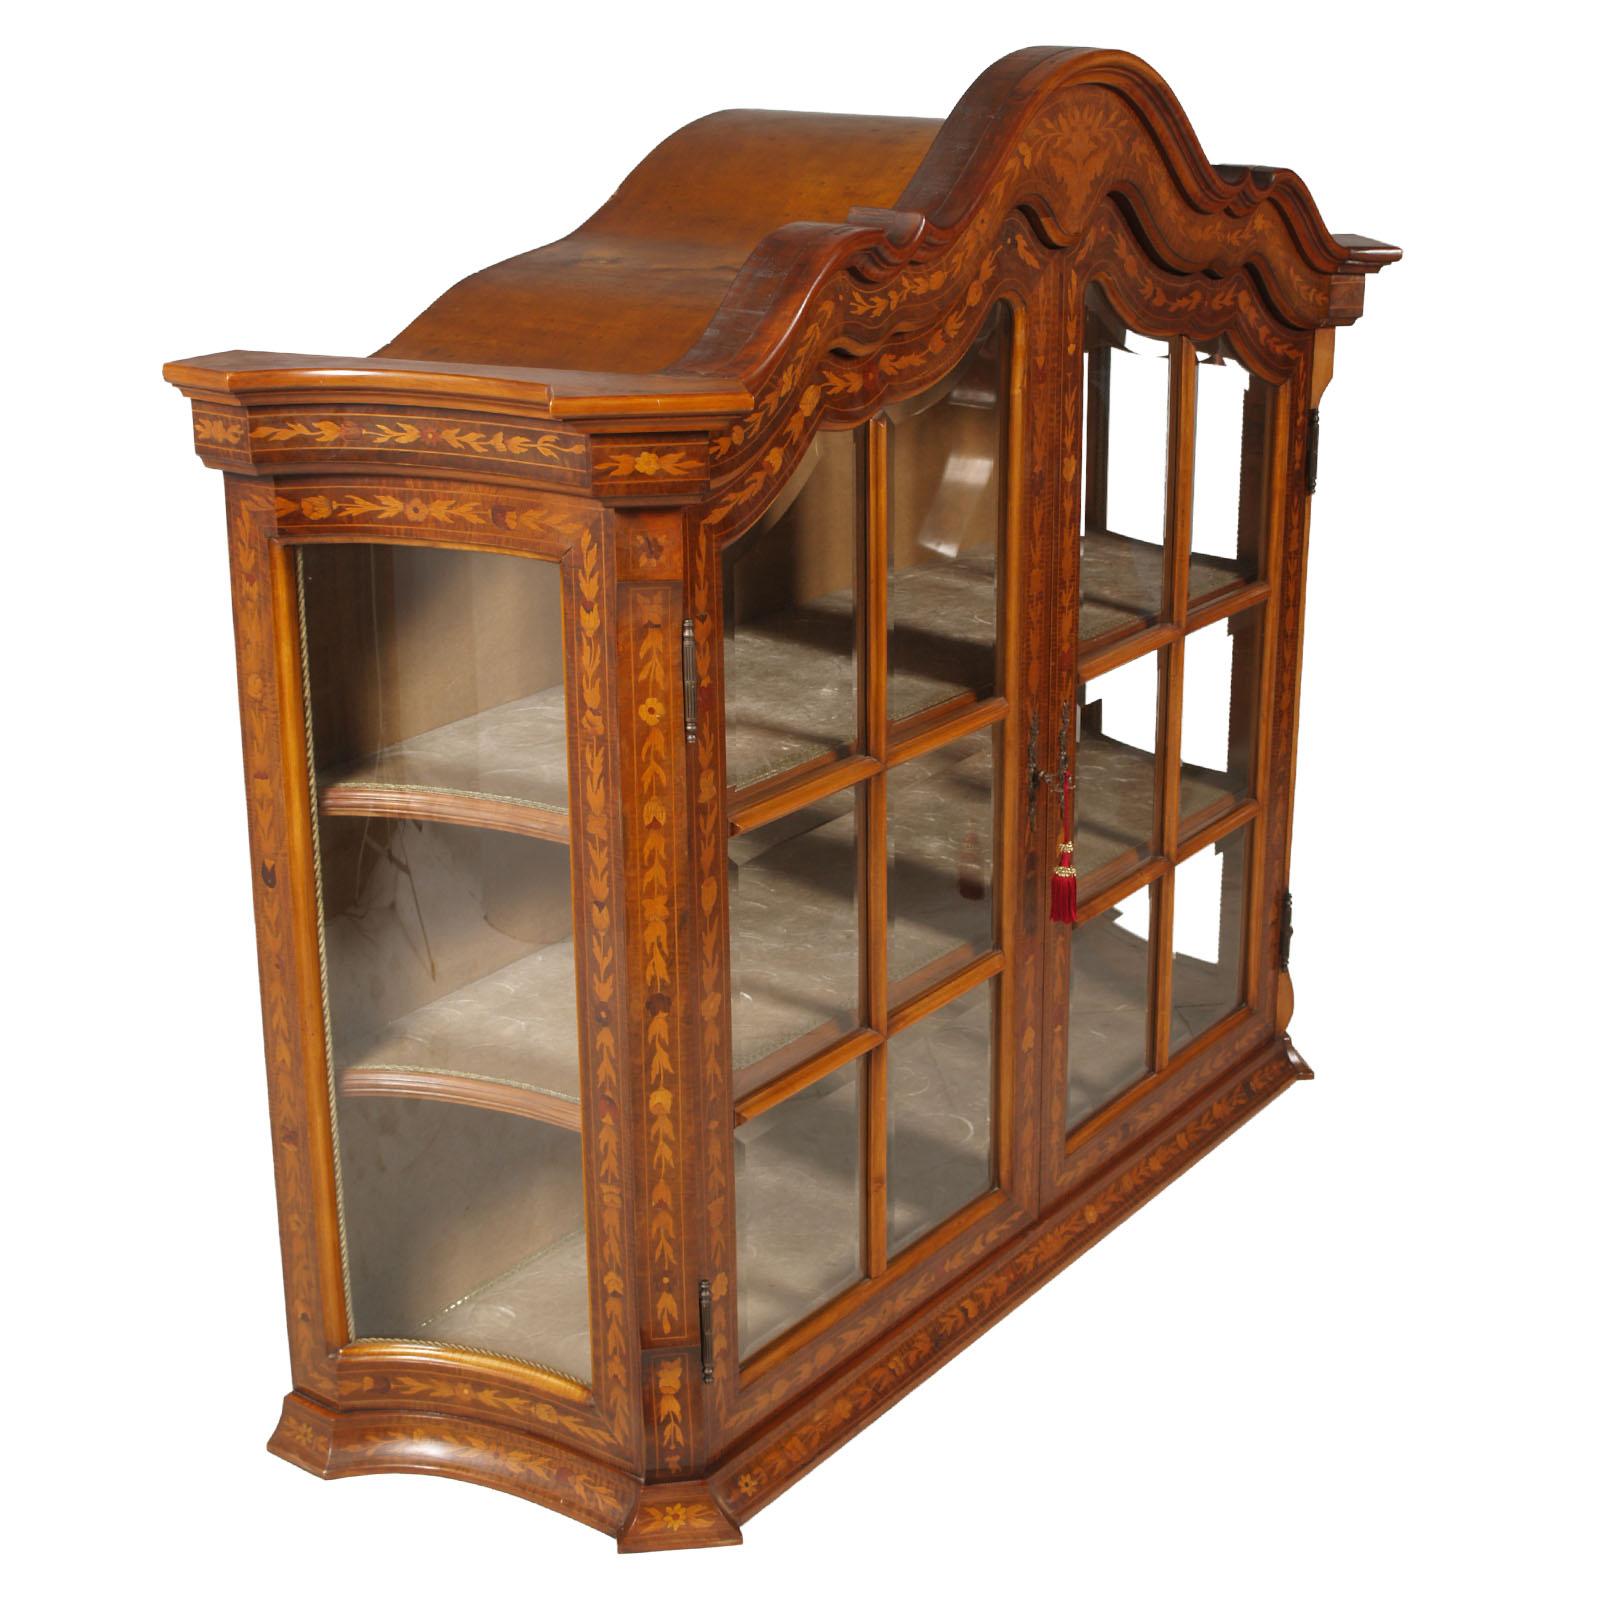 1950s Venetian Walnut Baroque Sideboard and Display Cabinet Richly Floral Inlaid For Sale 8